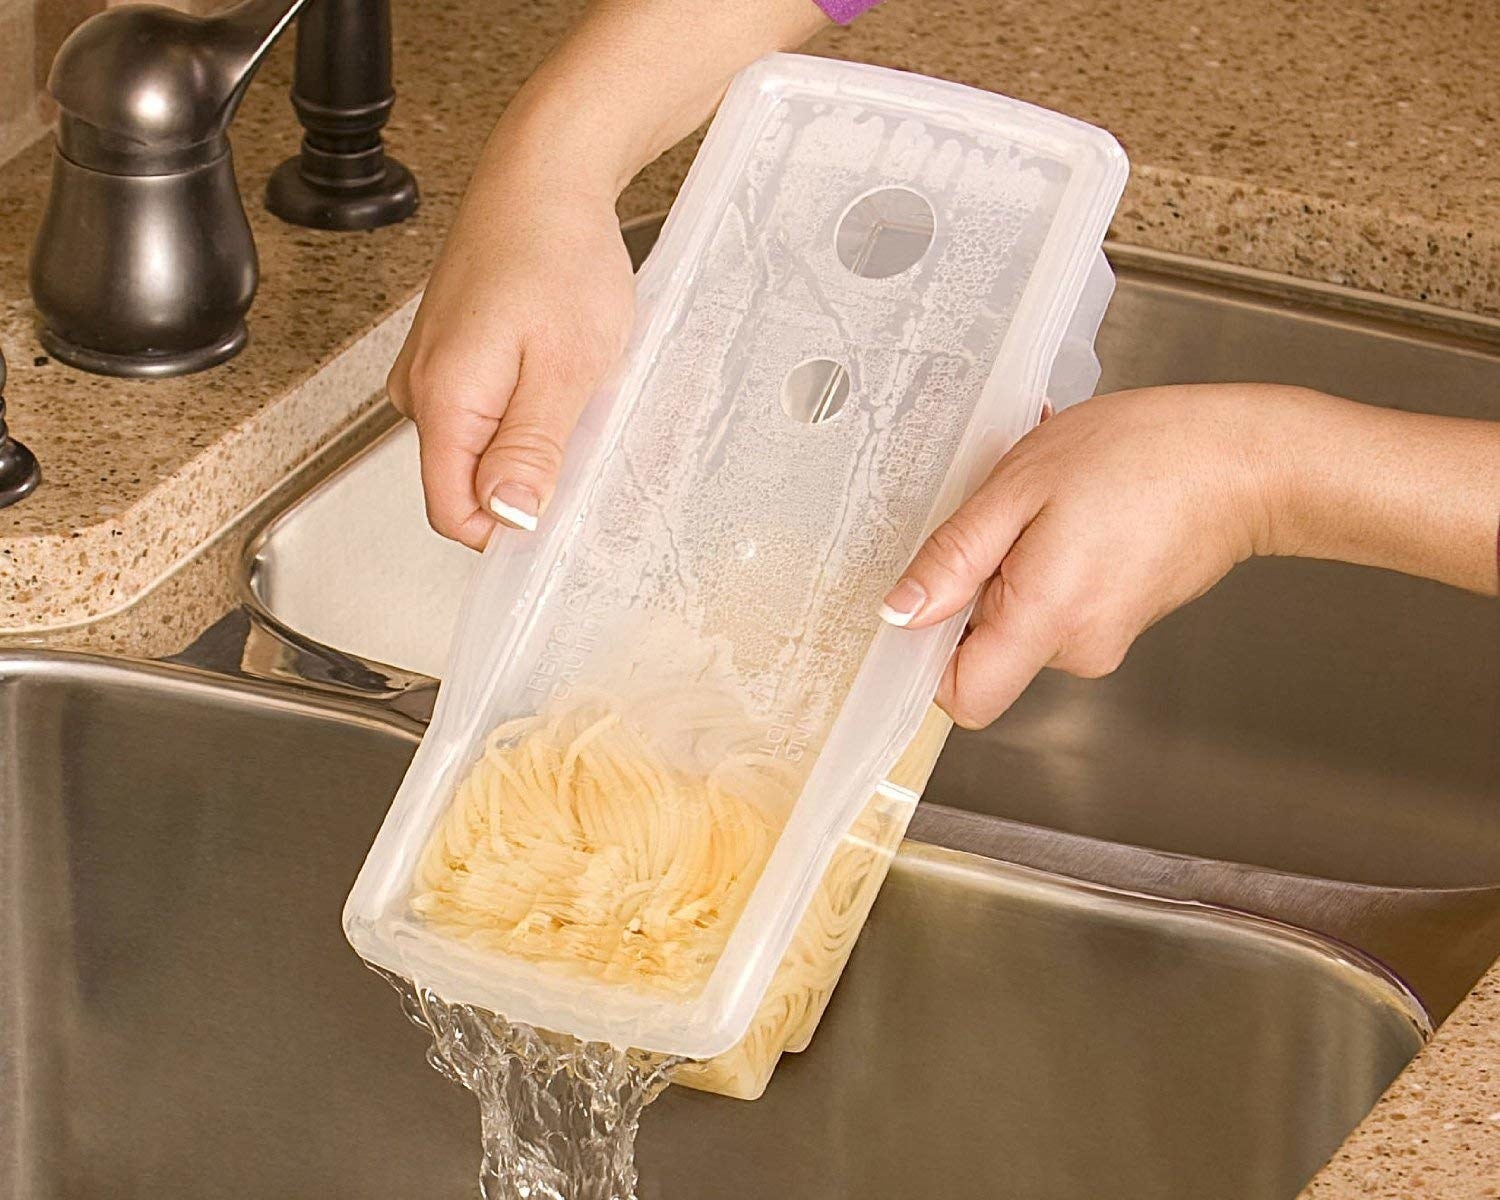 A model holds the Fasta Pasta, a rectangular container with cooked pasta inside, over a sink as they strain the water out